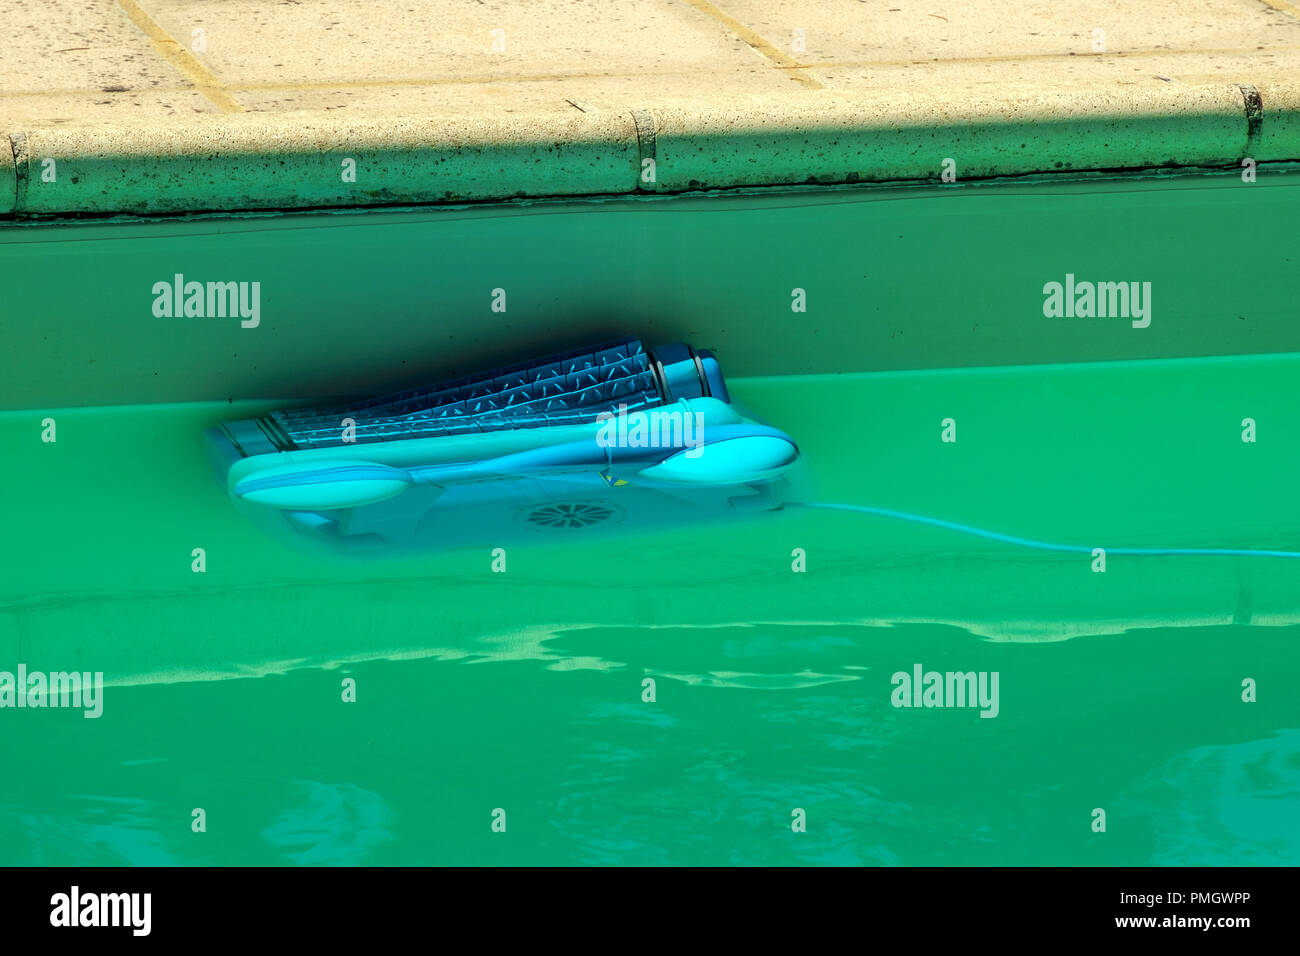 An automatic robot pool cleaner climbs the side of a cloudy swimming pool removing debris and algae Stock Photo